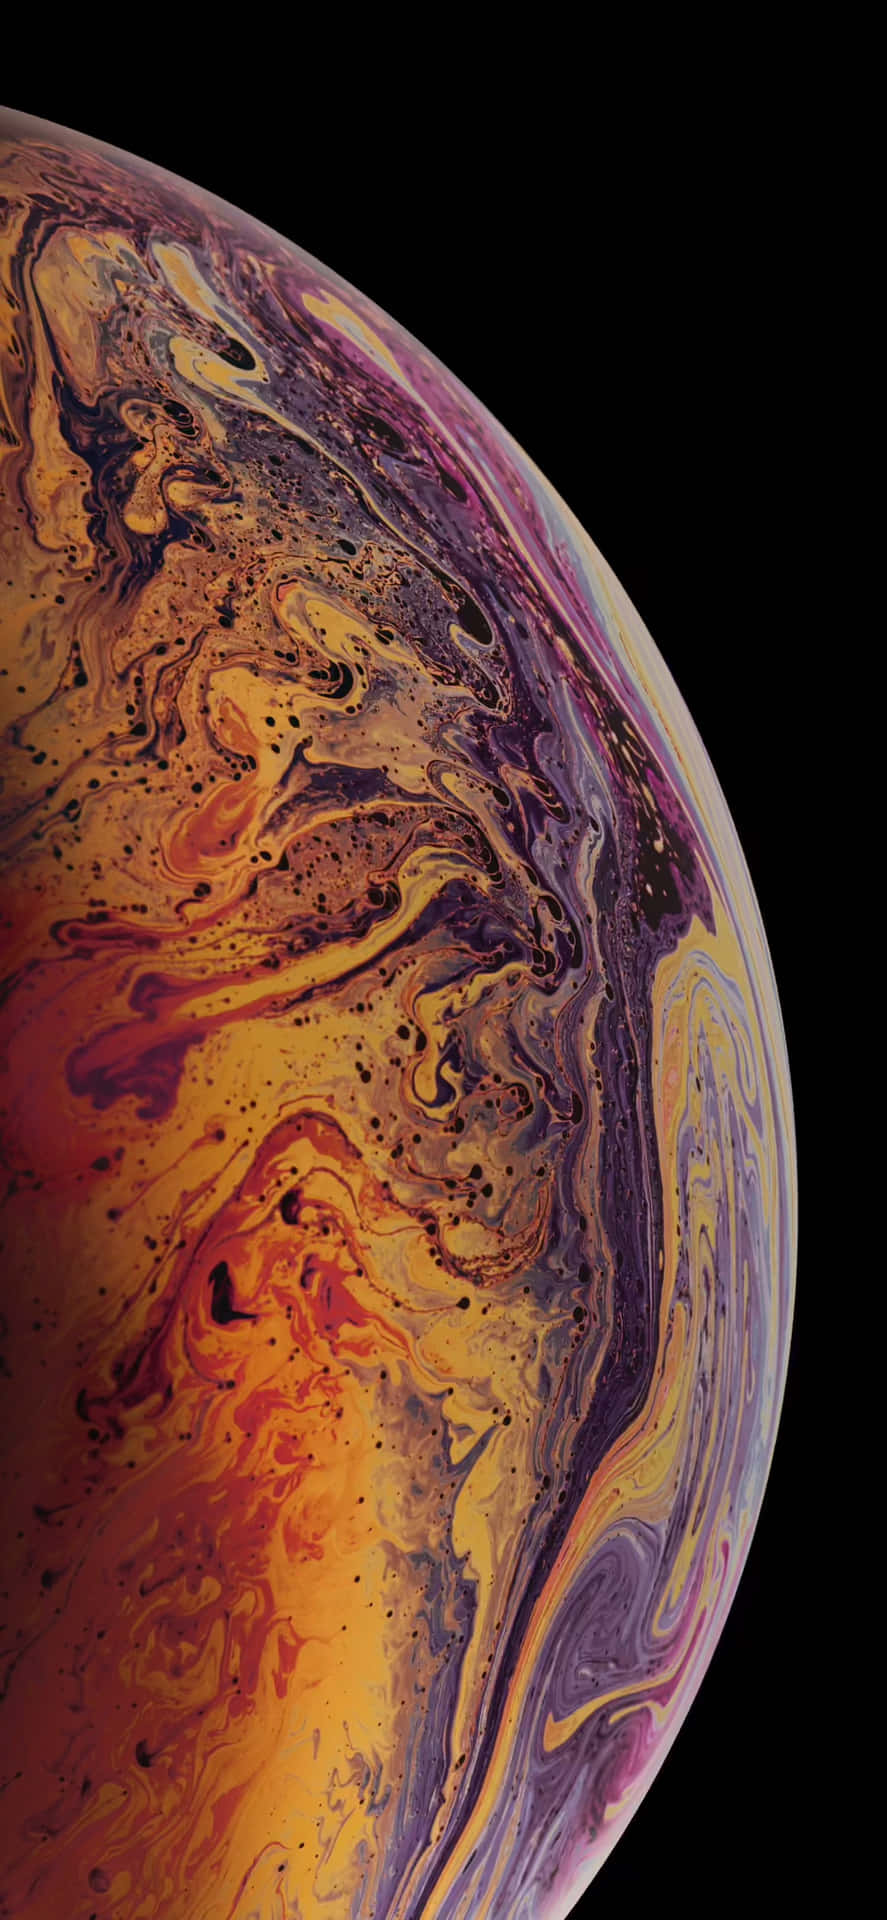 An Image Of An Apple Iphone Xs With A Colorful Swirl Wallpaper